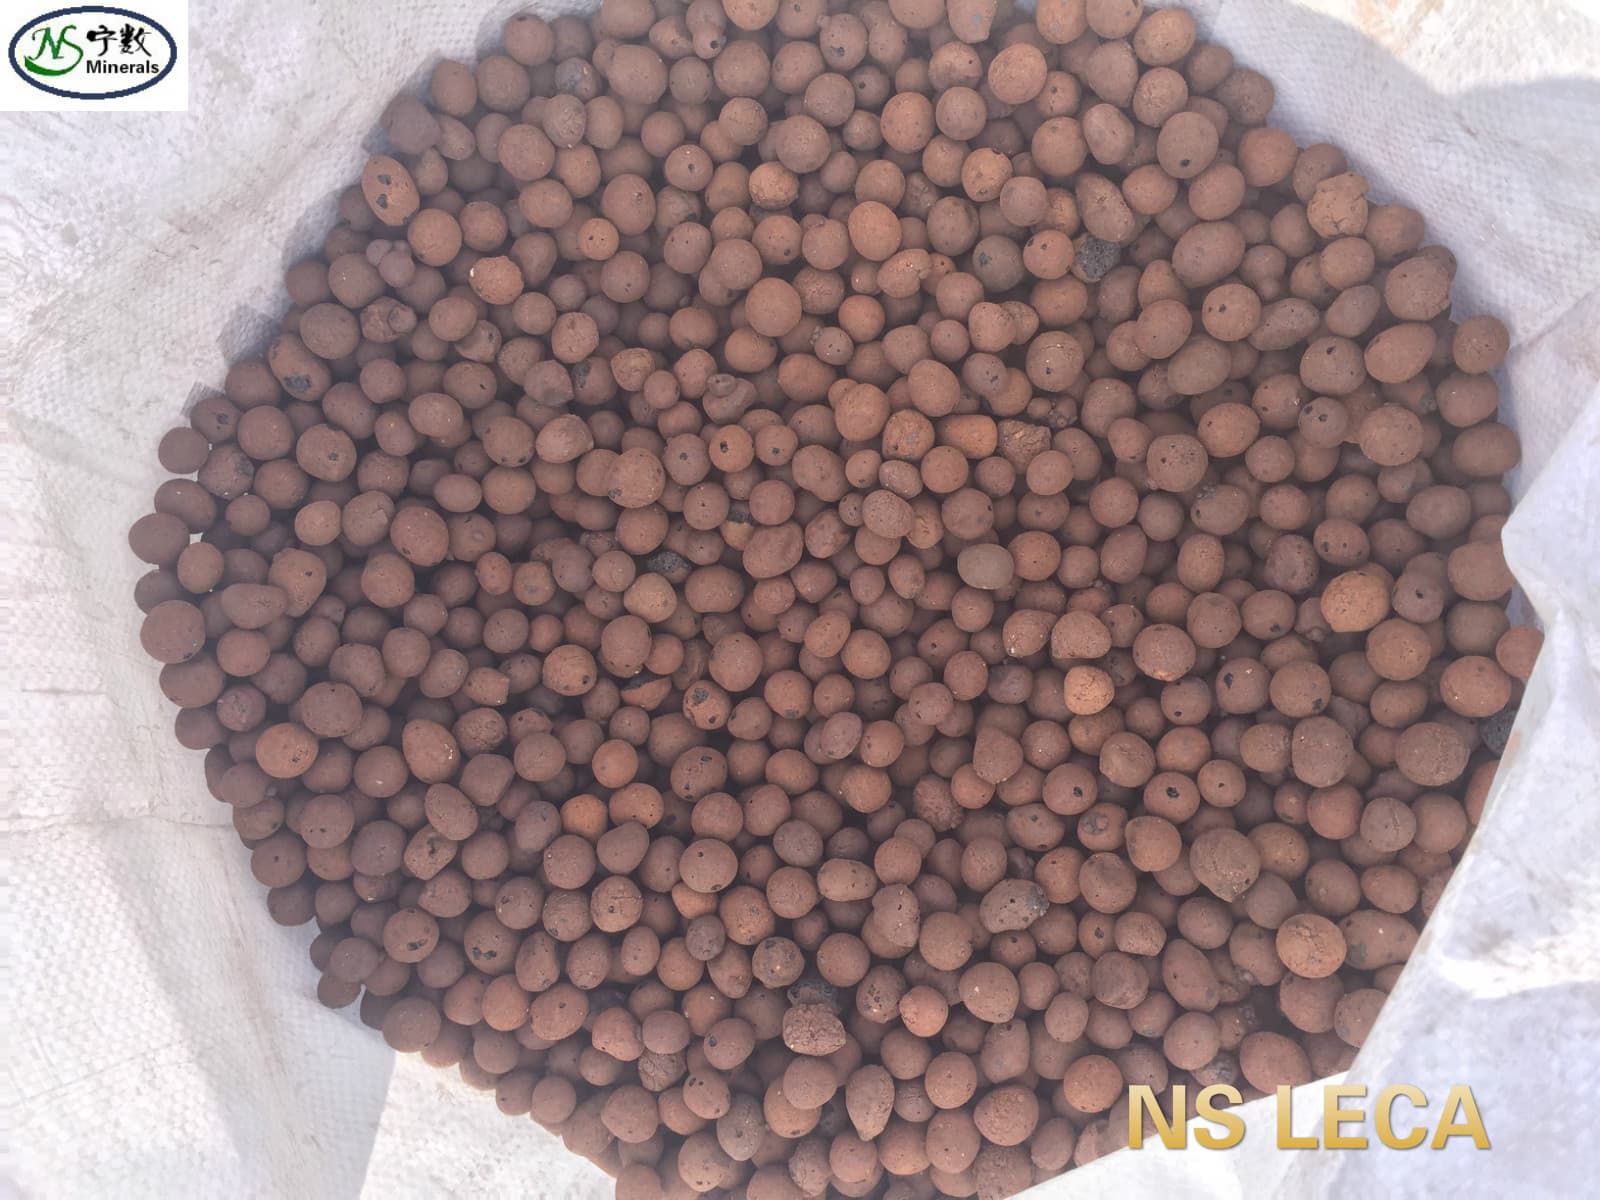 Leca Grow Medium Expanded Clay Pebbles for Hydroponics